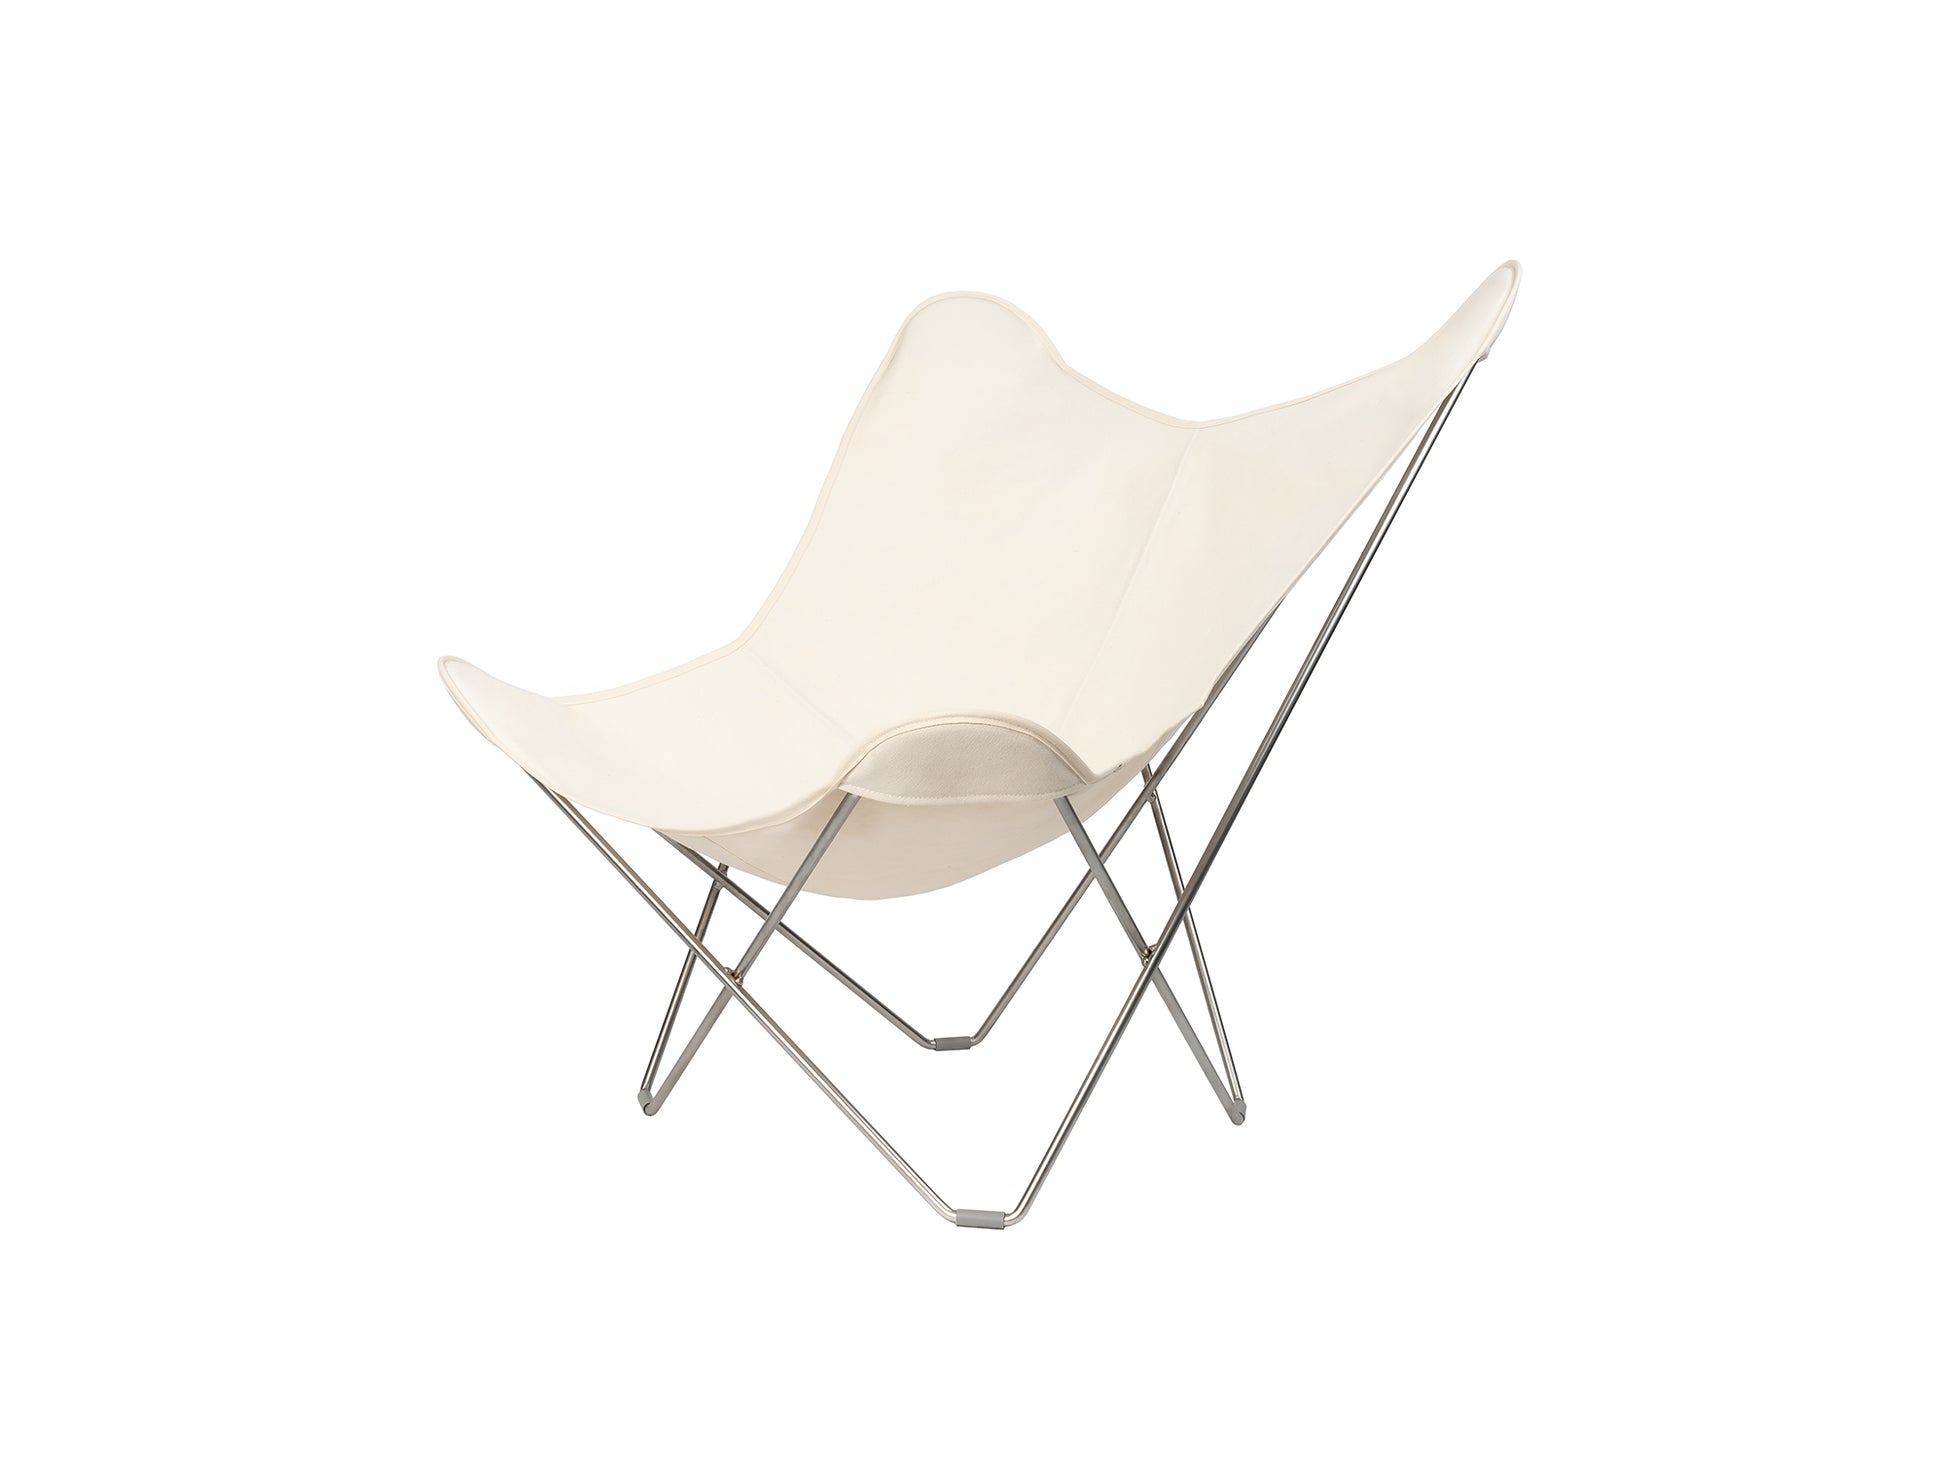 Mariposa Butterfly Canvas Chair by Cuero - Chrome Frame / Off-White Cotton